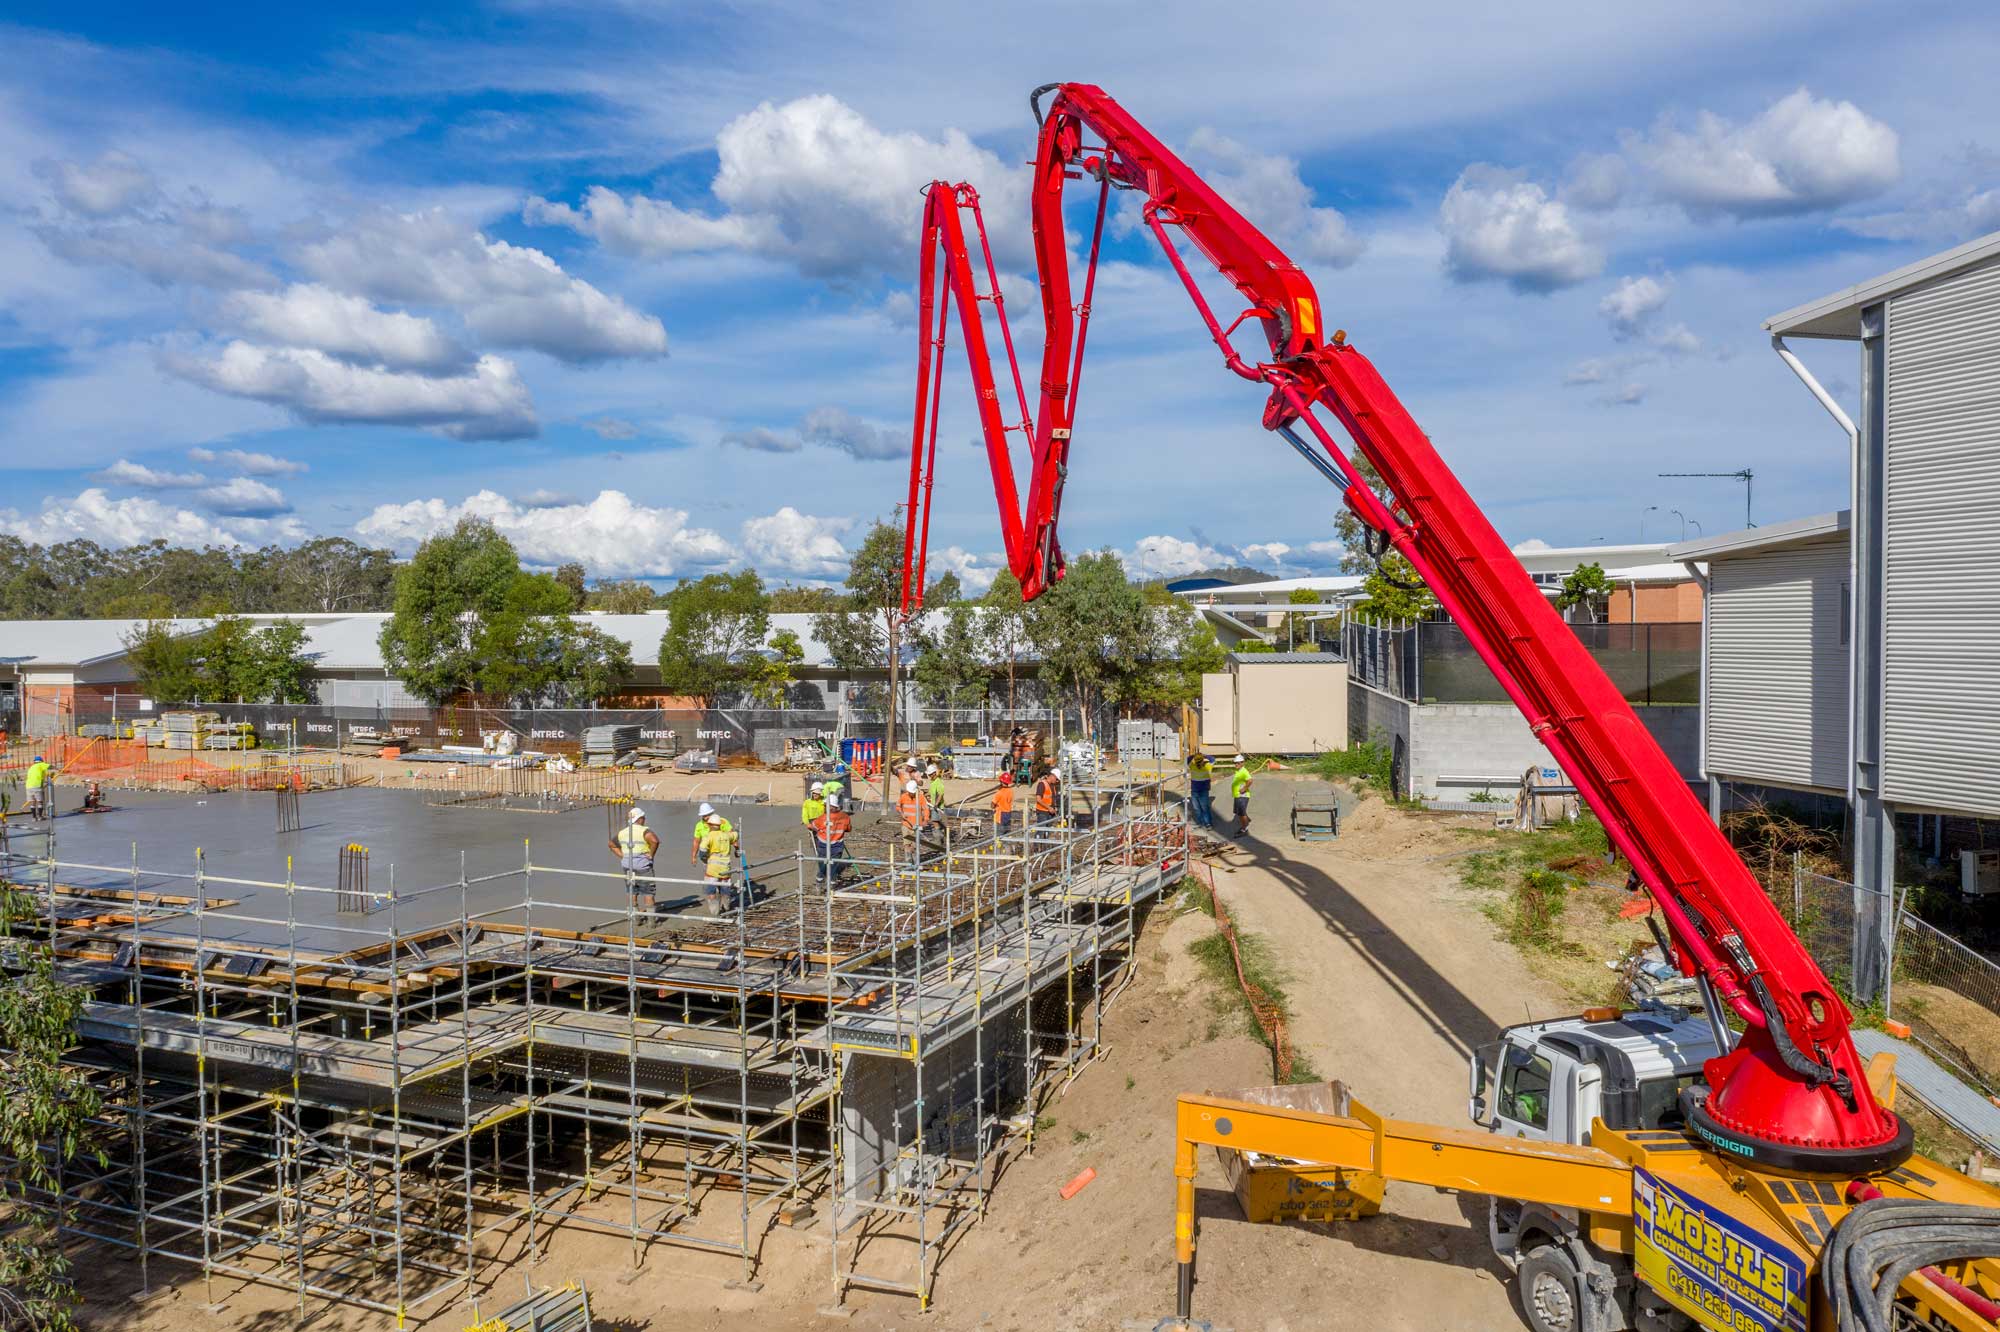 The Mavic2Pro captures the 40m concrete line and boom pump hovering at 5 metres above the ground - Augusta State School concrete slab pour